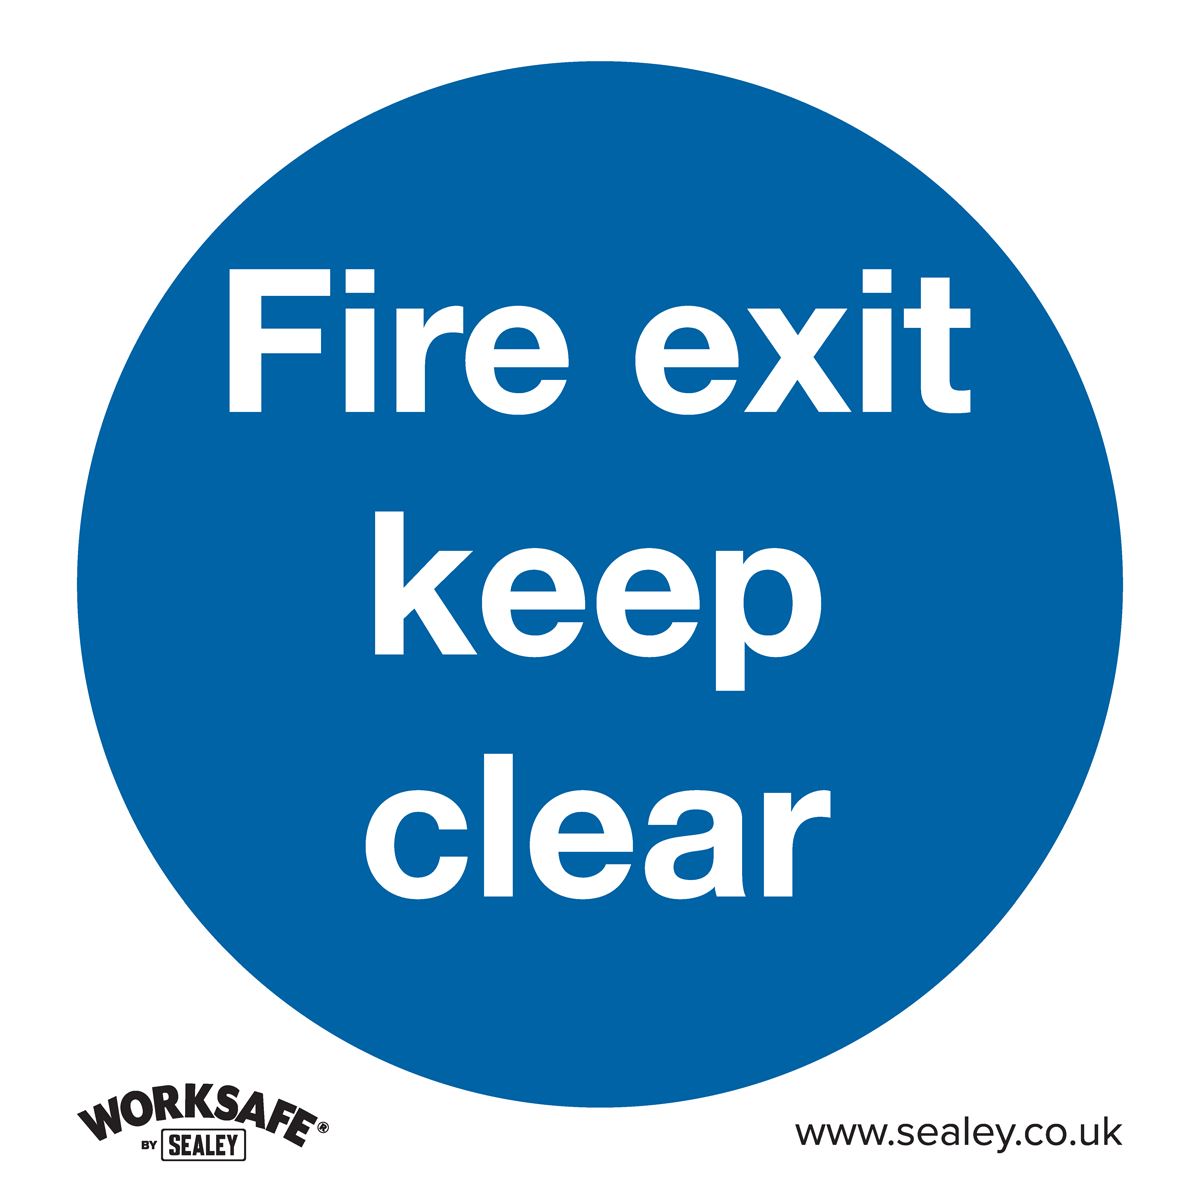 Worksafe by Sealey Mandatory Safety Sign - Fire Exit Keep Clear - Rigid Plastic - Pack of 10